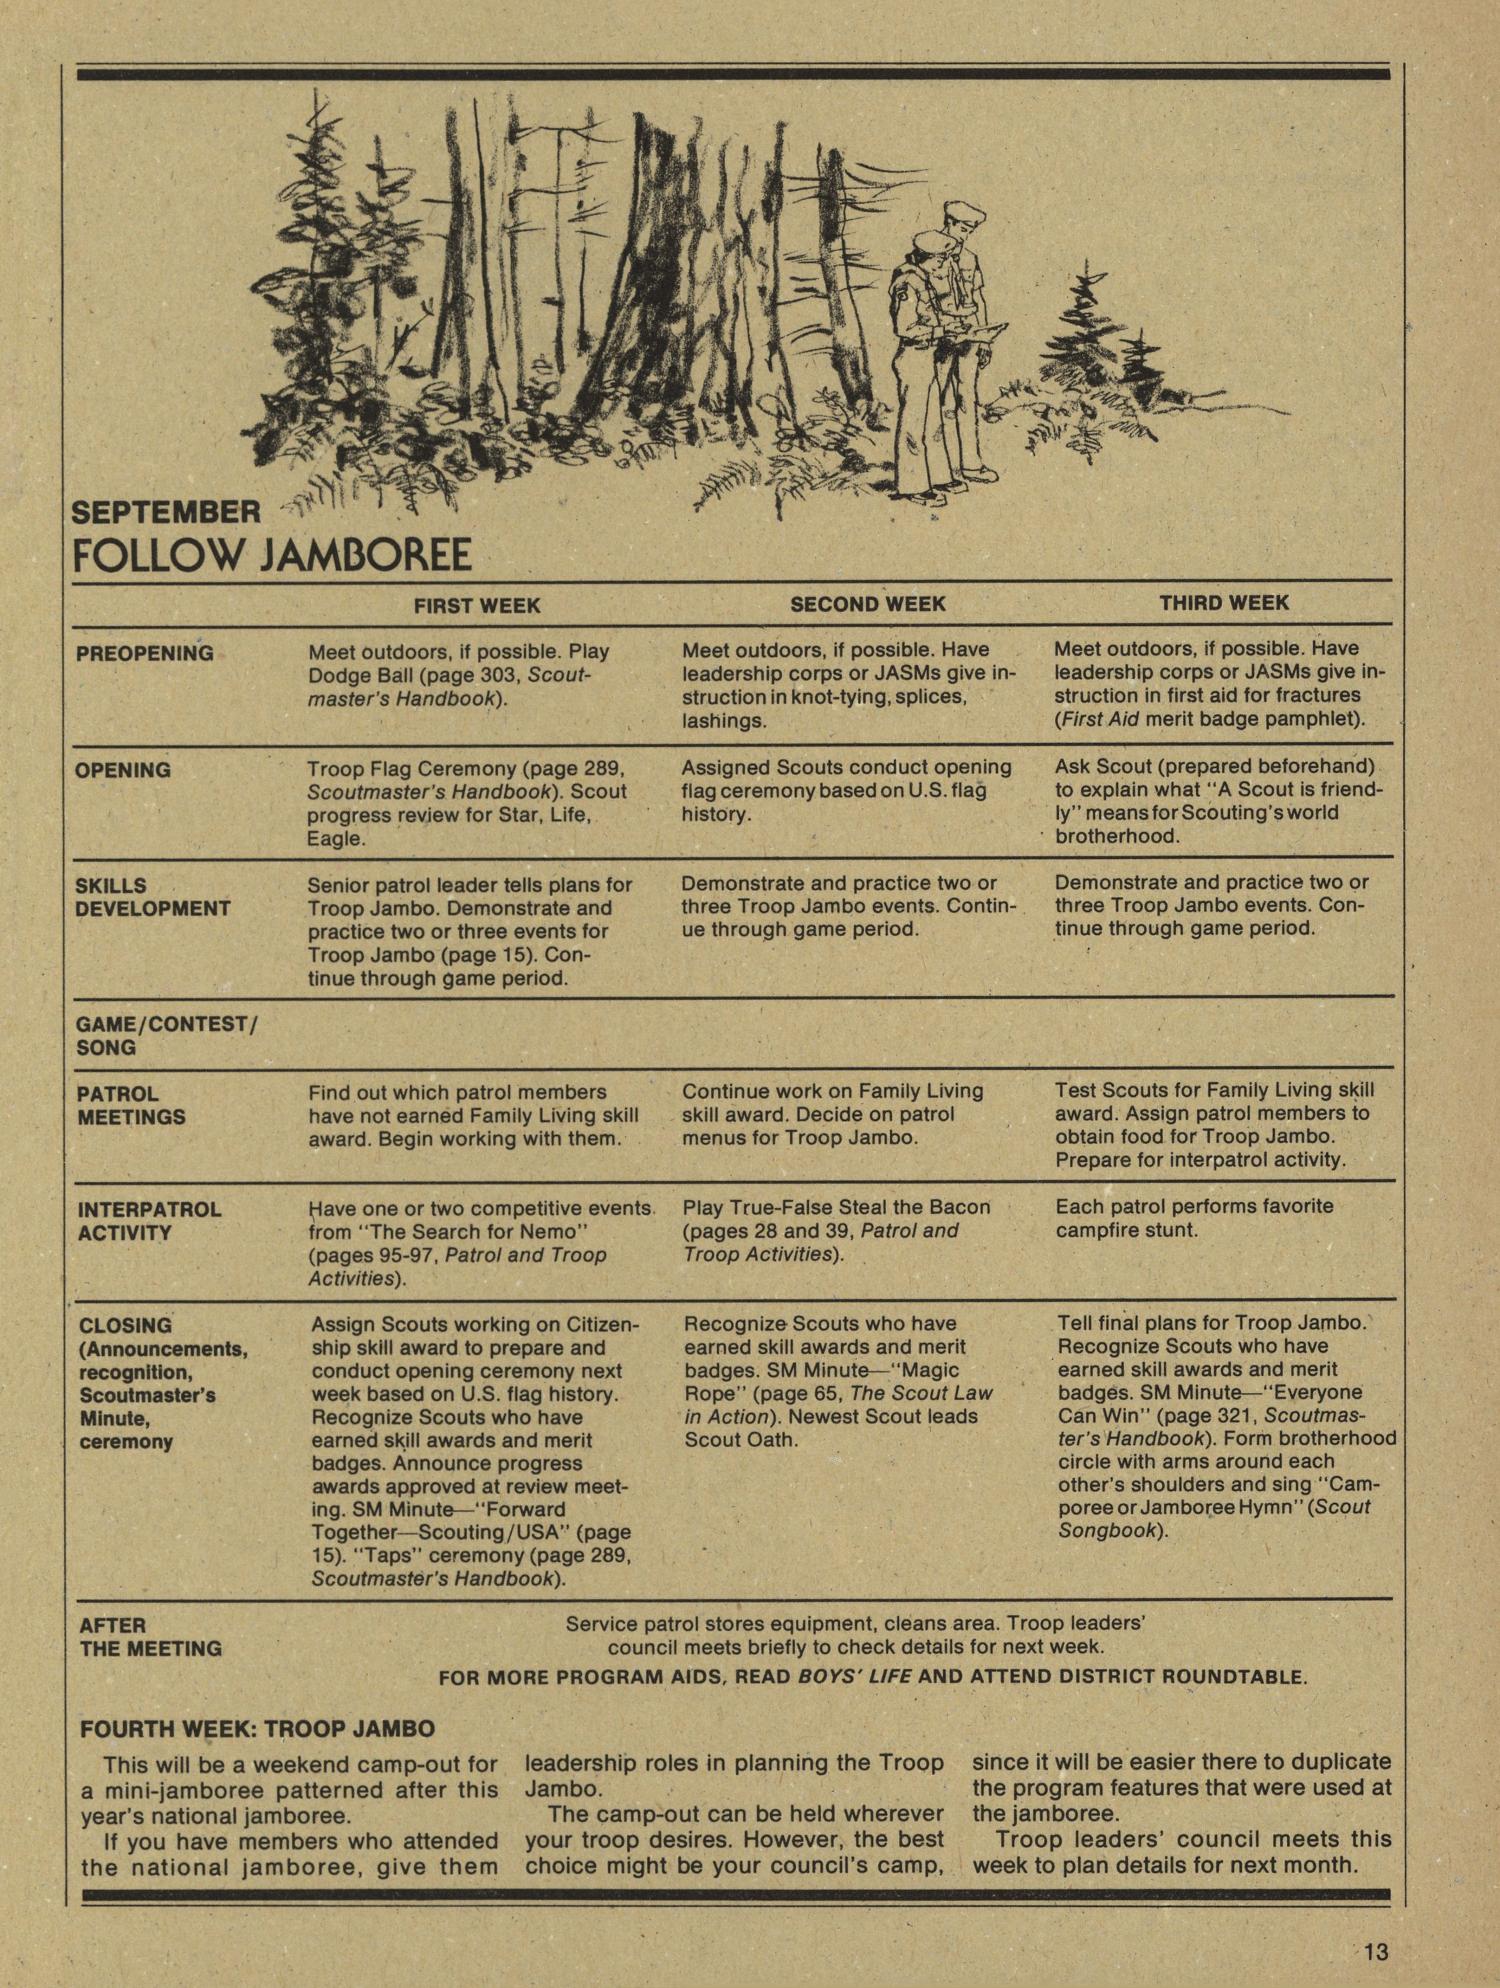 Scouting, Volume 65, Number 3, May-June 1977
                                                
                                                    13
                                                